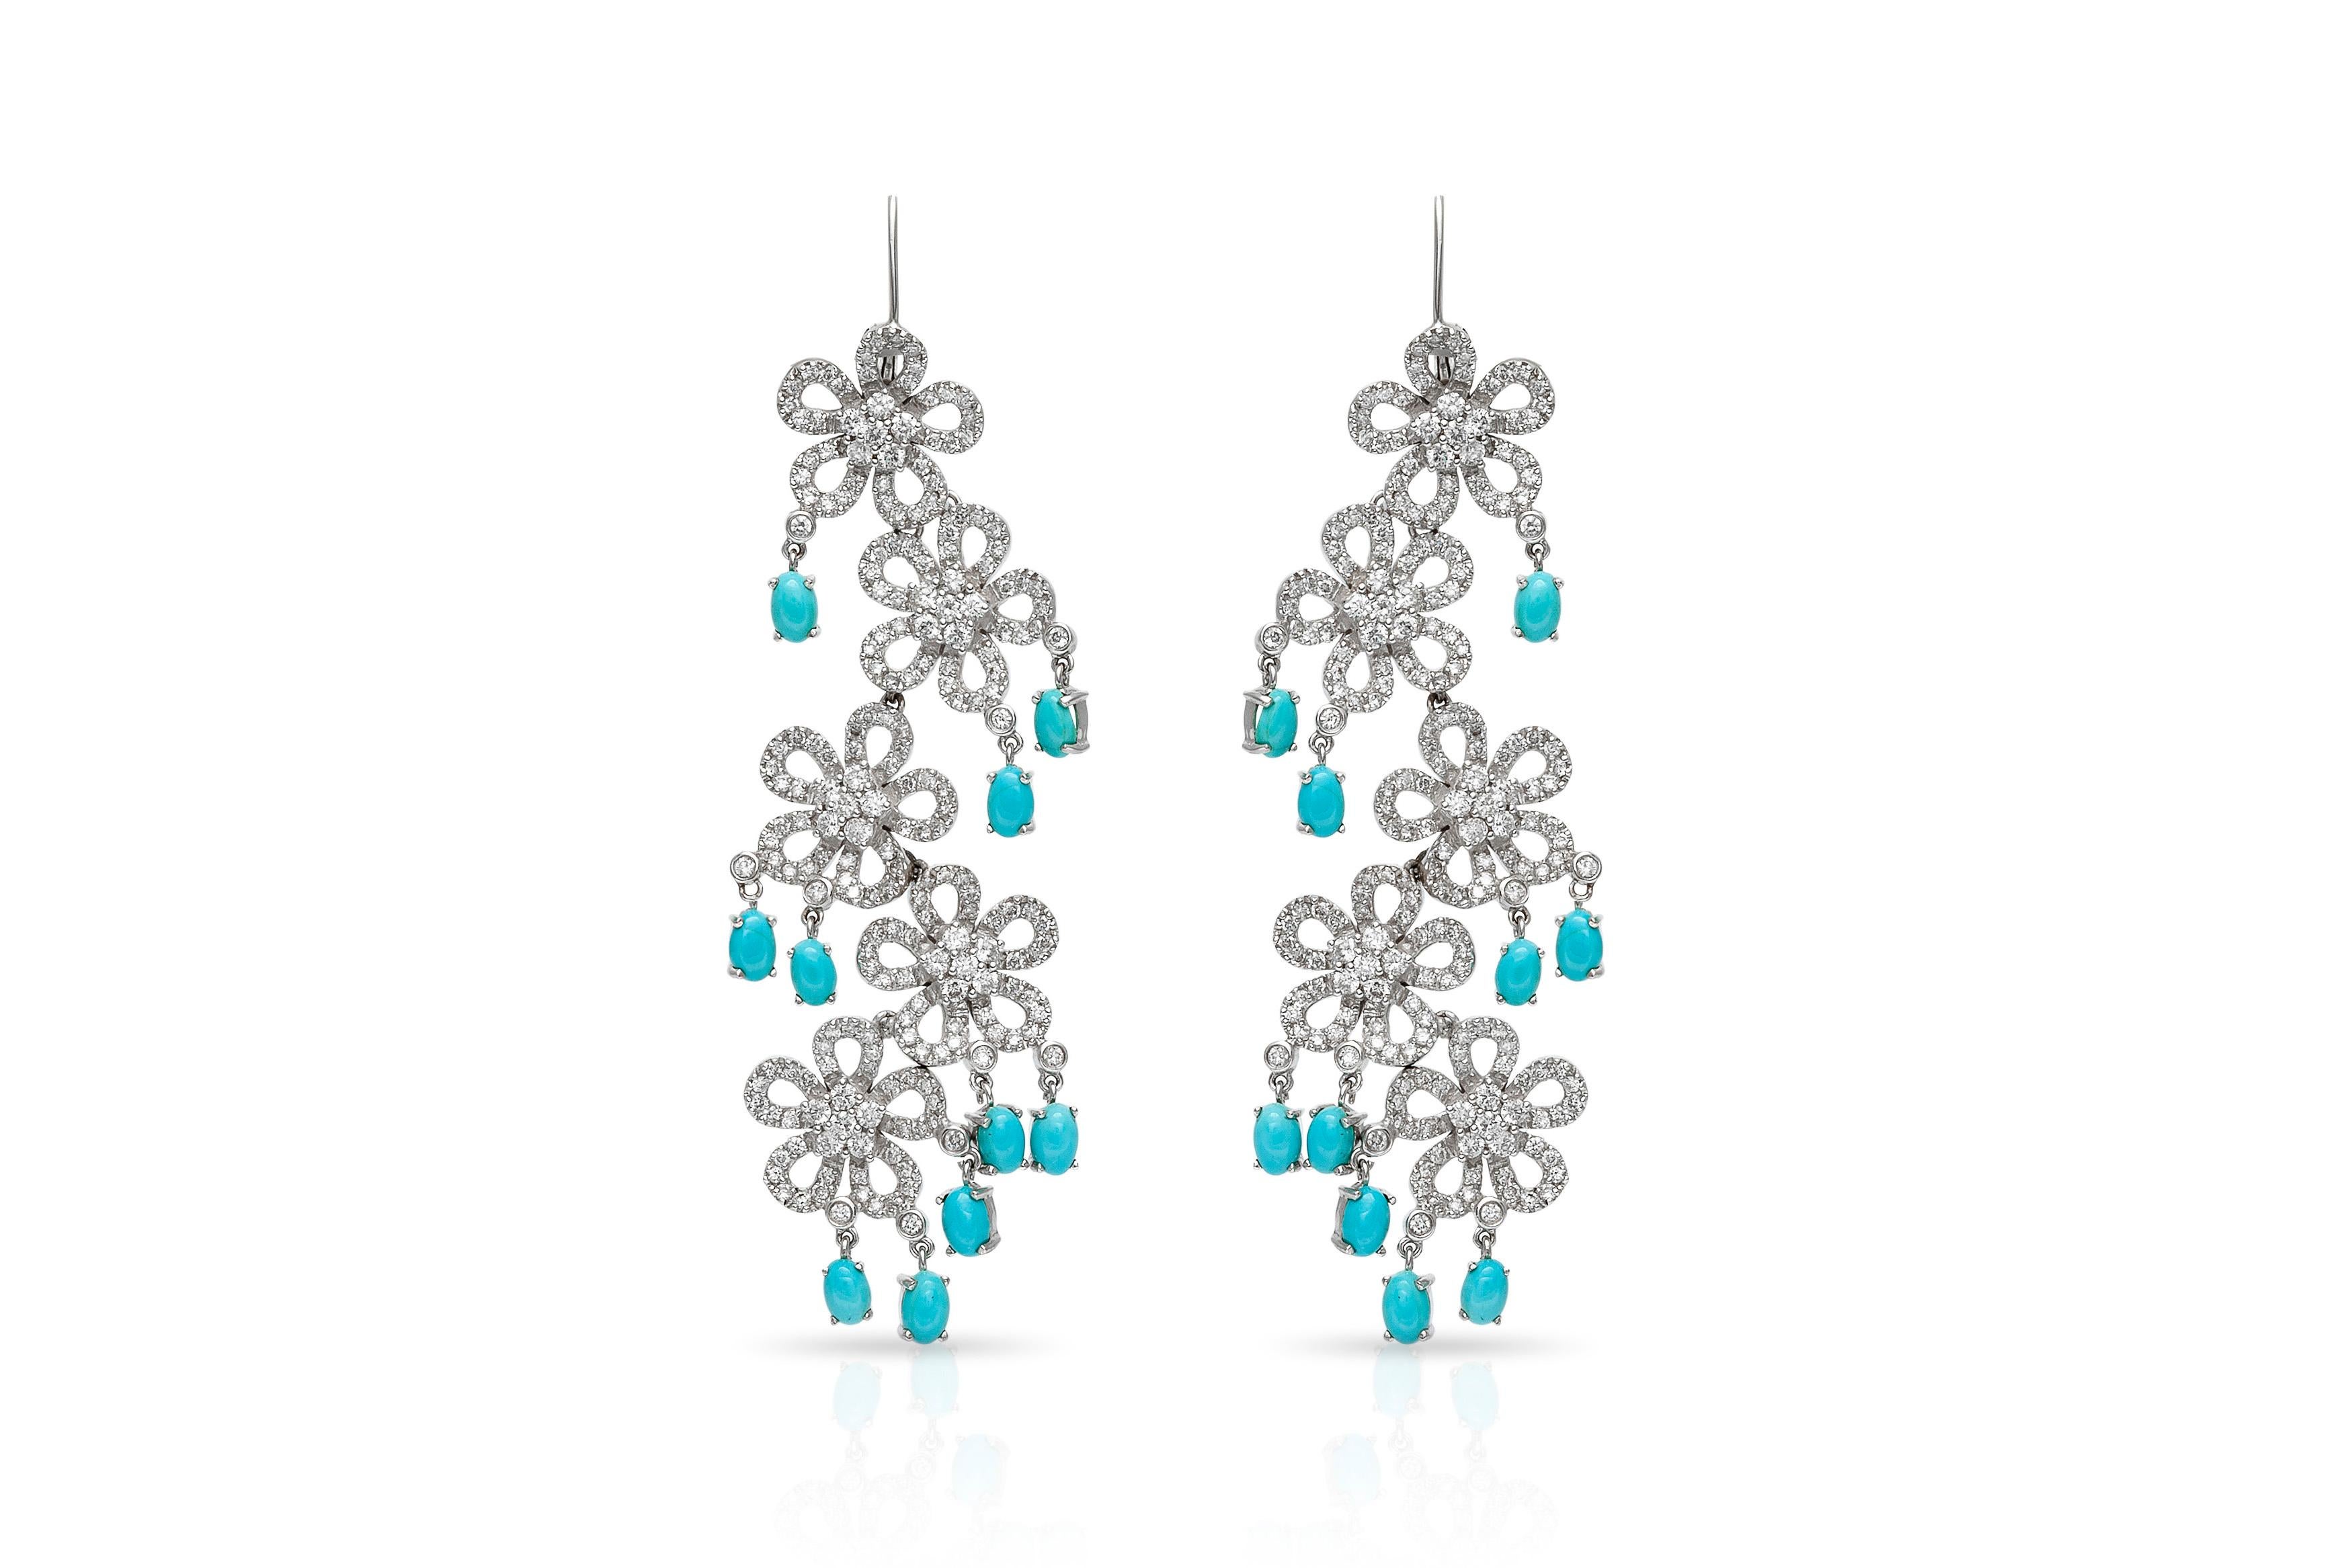 Earrings, finely crafted in 18k white gold with diamonds weighting approximately a total of 5.10 carats and turquoise weighting a total of 4.93 carats. Circa 1980's.